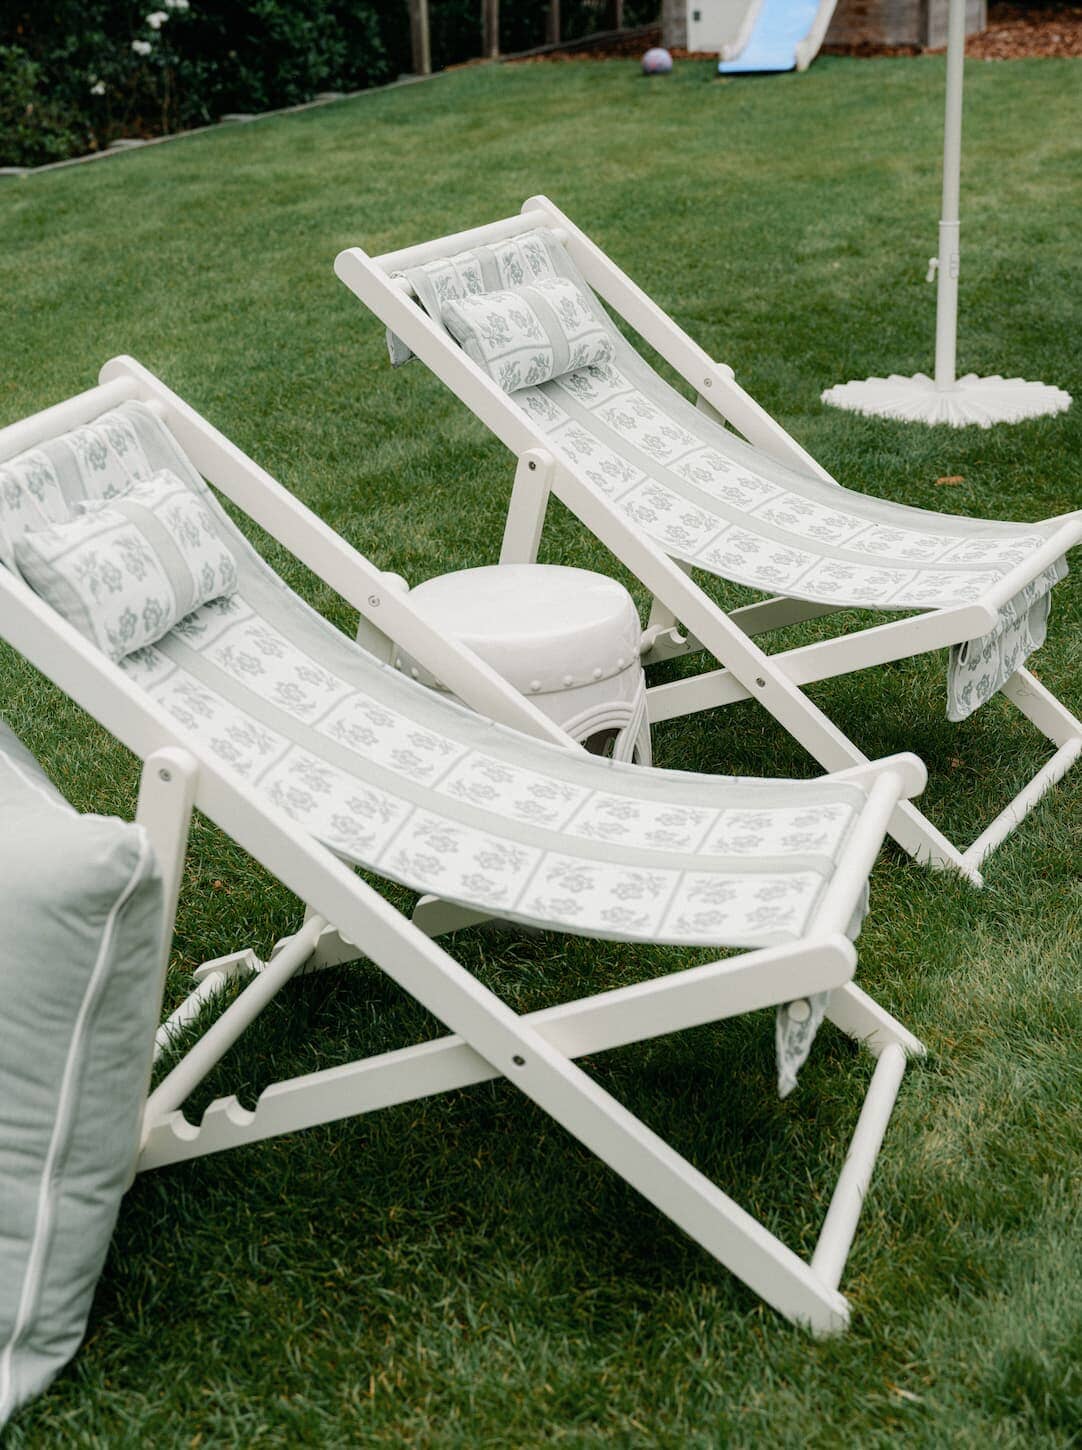 Sling chairs in a garden setting on grass